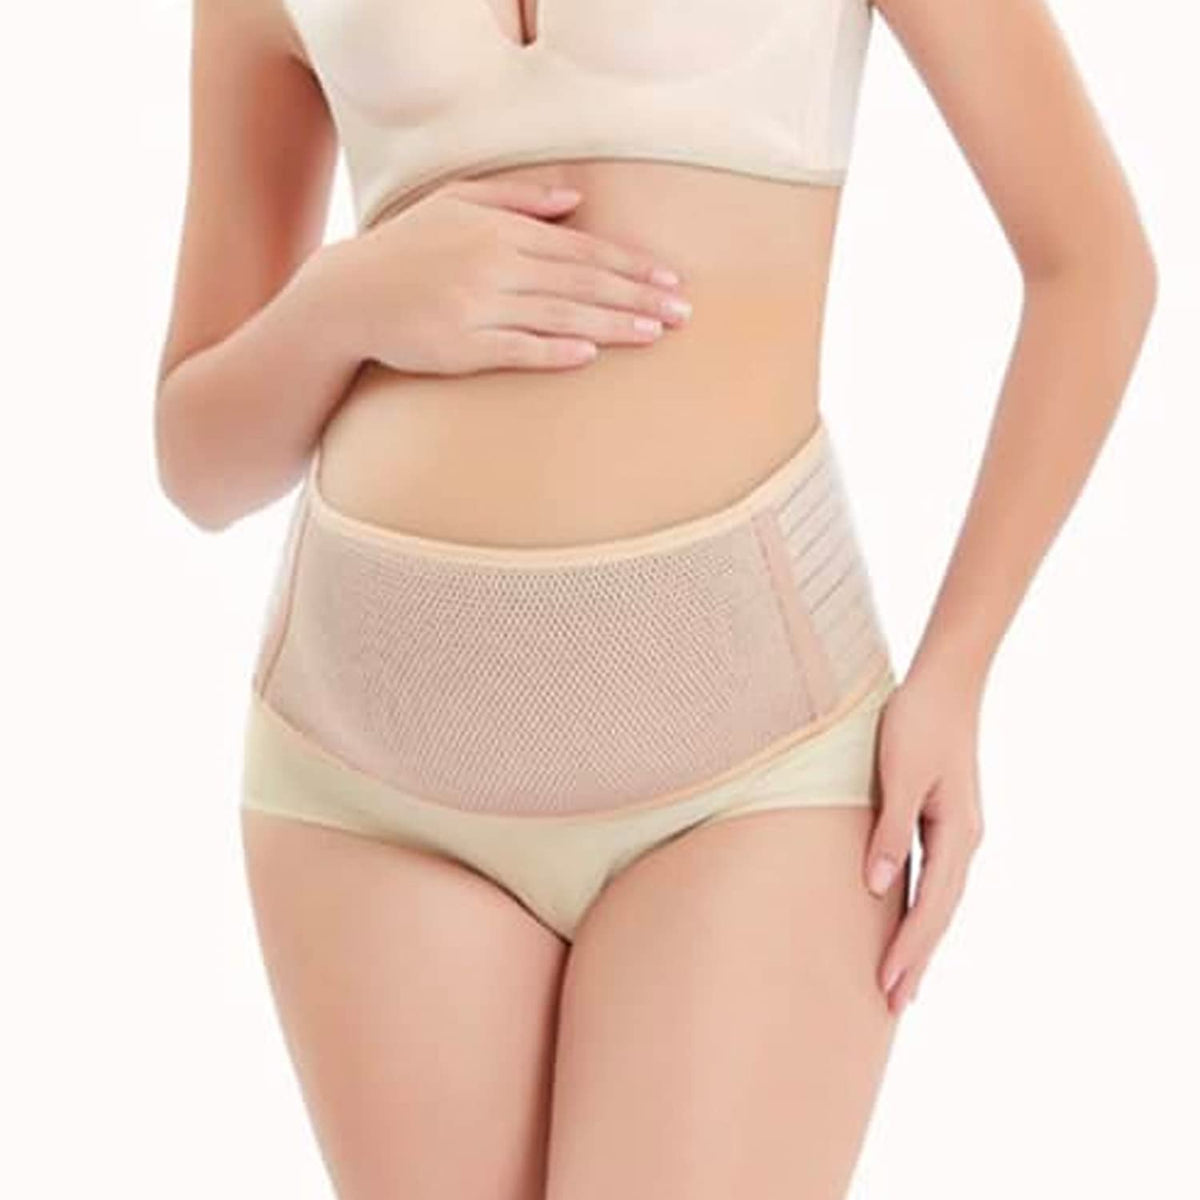 MUZOOY Women's Maternity Belt 2.0, Pregnancy Belly Band Antepartum  Abdominal Back Support Universal Size Beige 